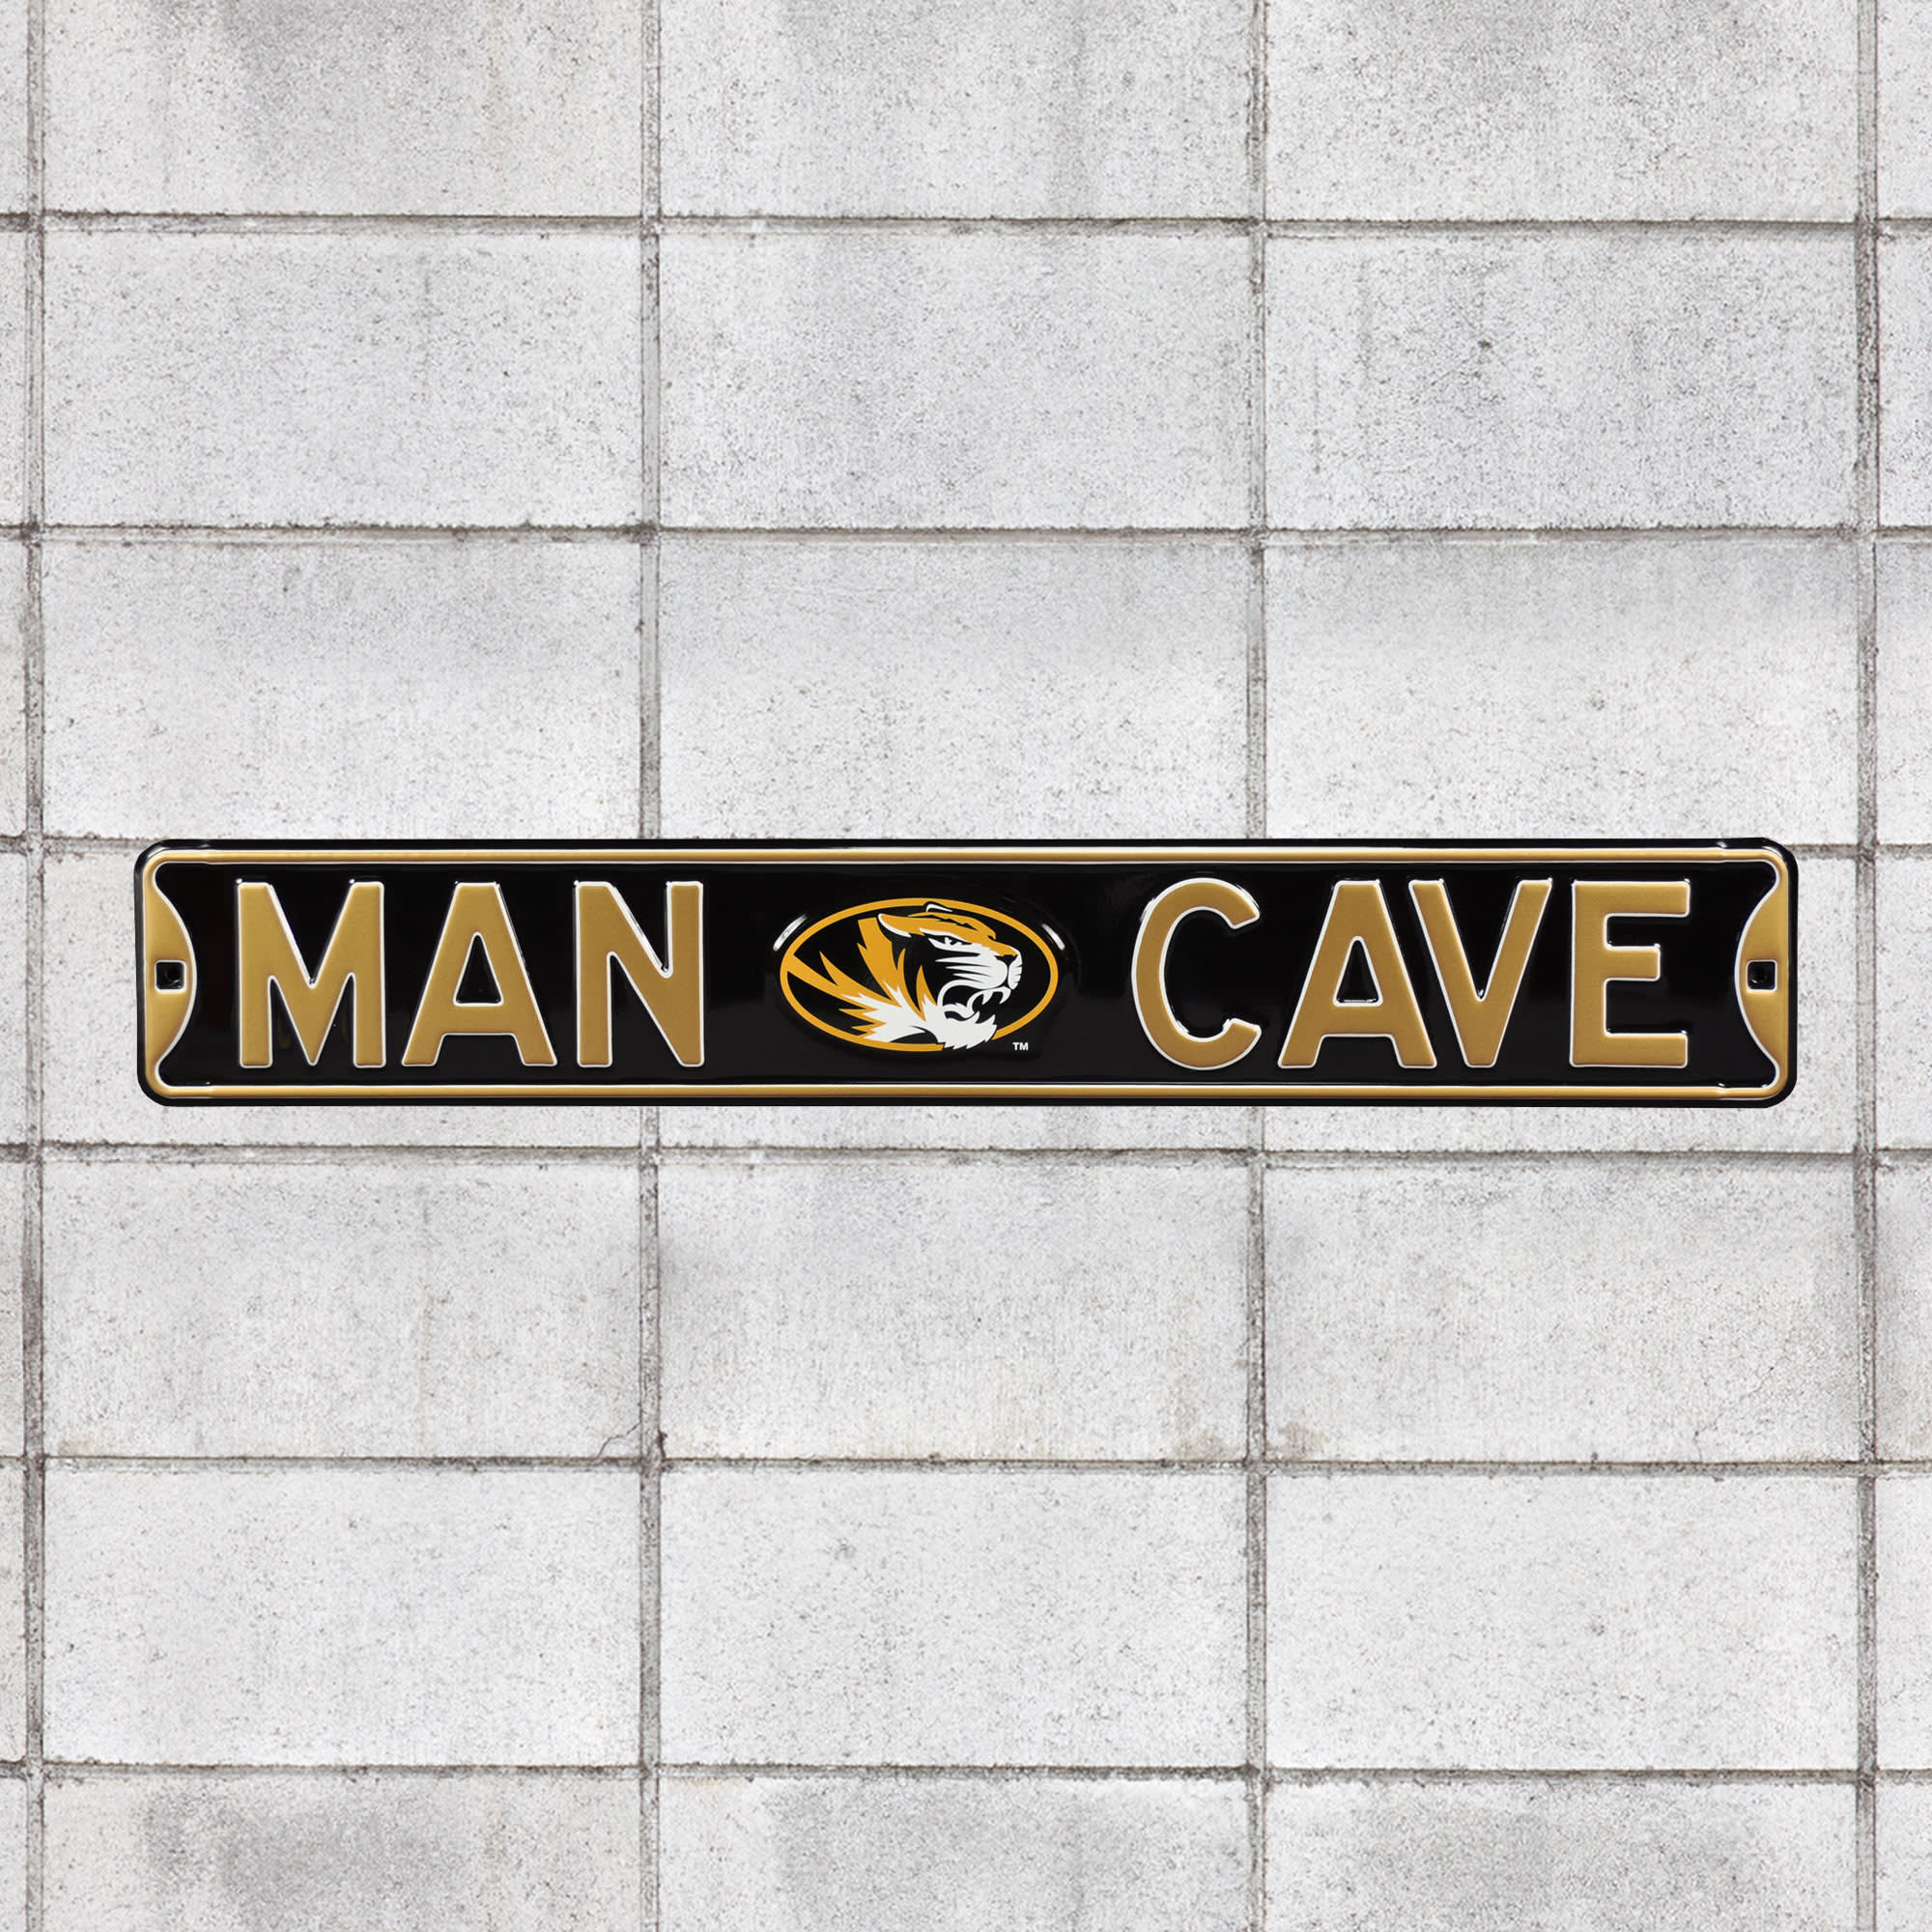 Missouri Tigers: Man Cave - Officially Licensed Metal Street Sign 36.0"W x 6.0"H by Fathead | 100% Steel